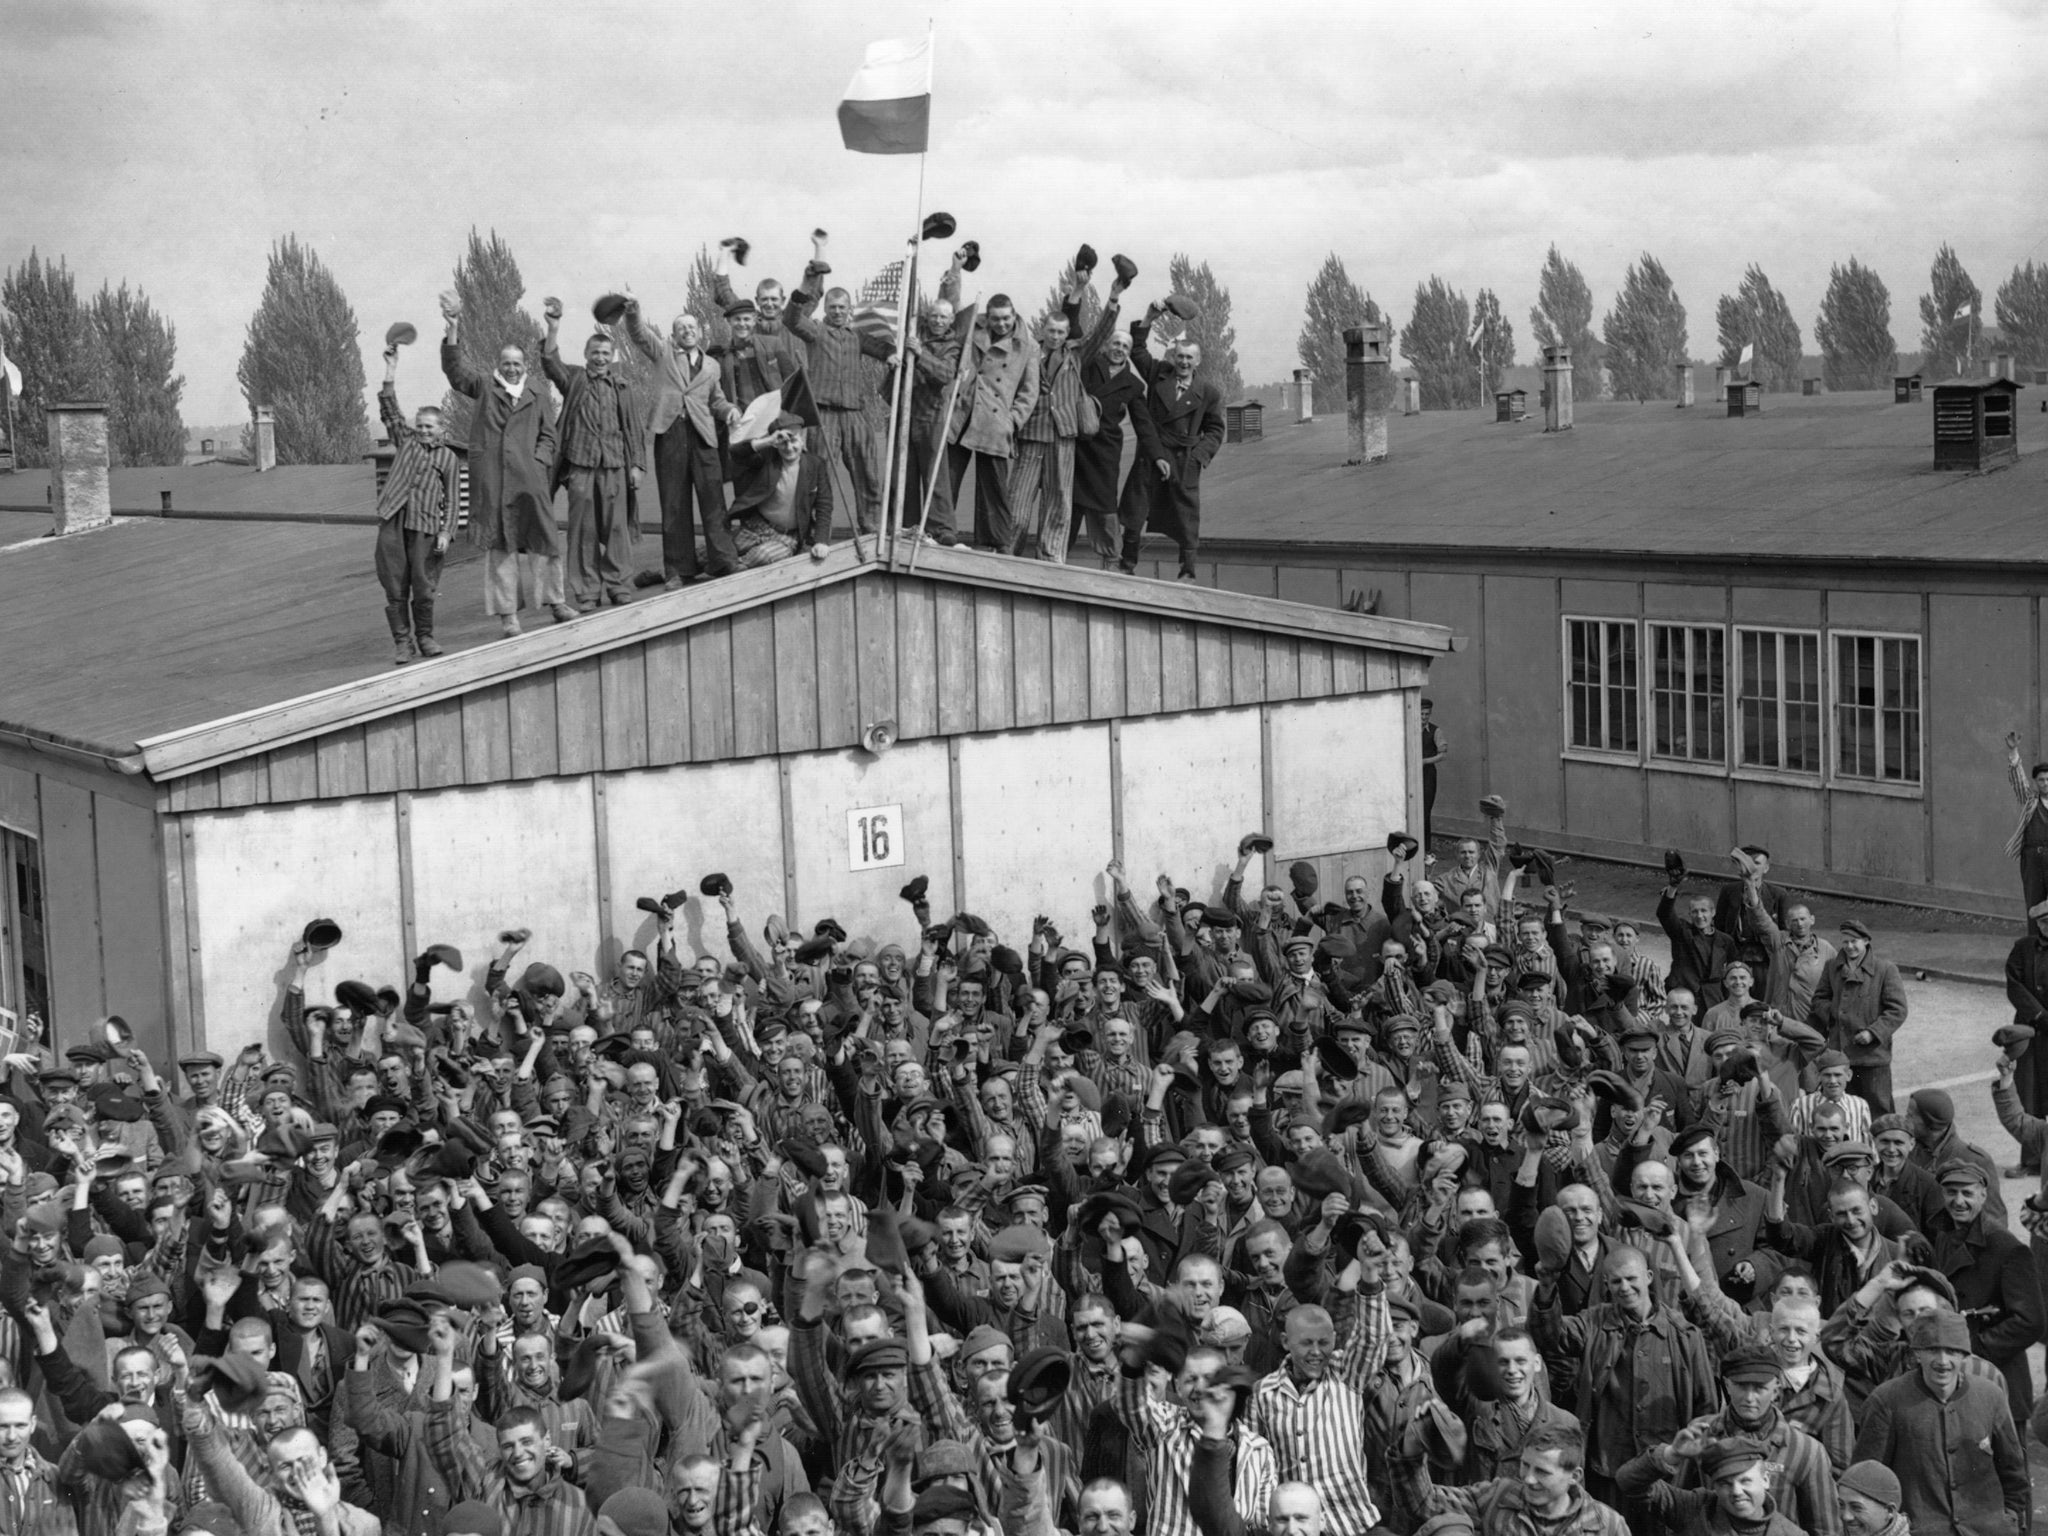 Prisoners at Dachau celebrate their liberation following the arrival of the US army